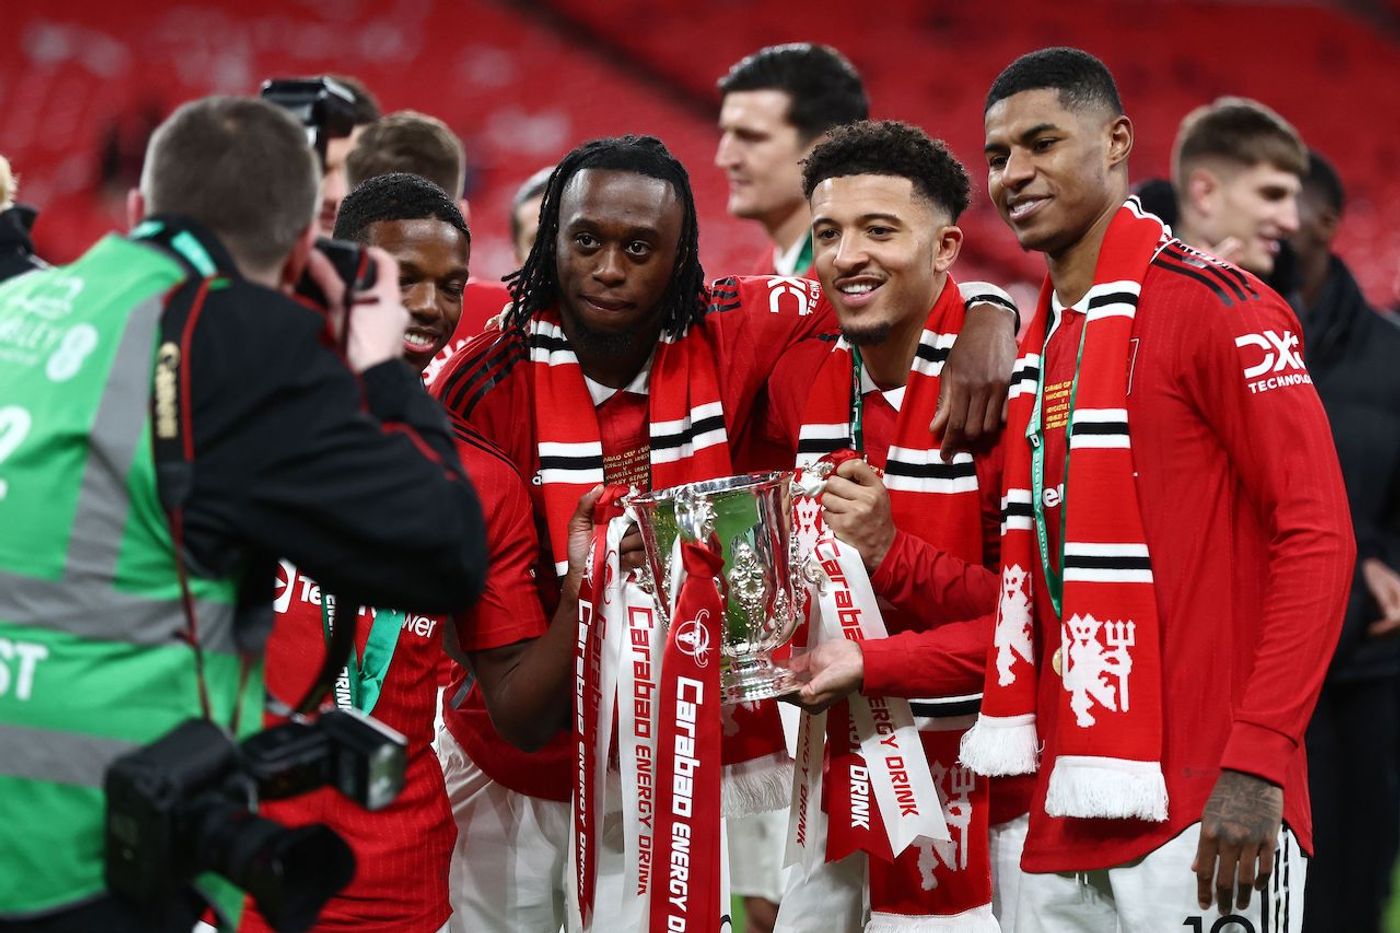 Gallery: Red Devils taste Carabao Cup glory - The English Football League